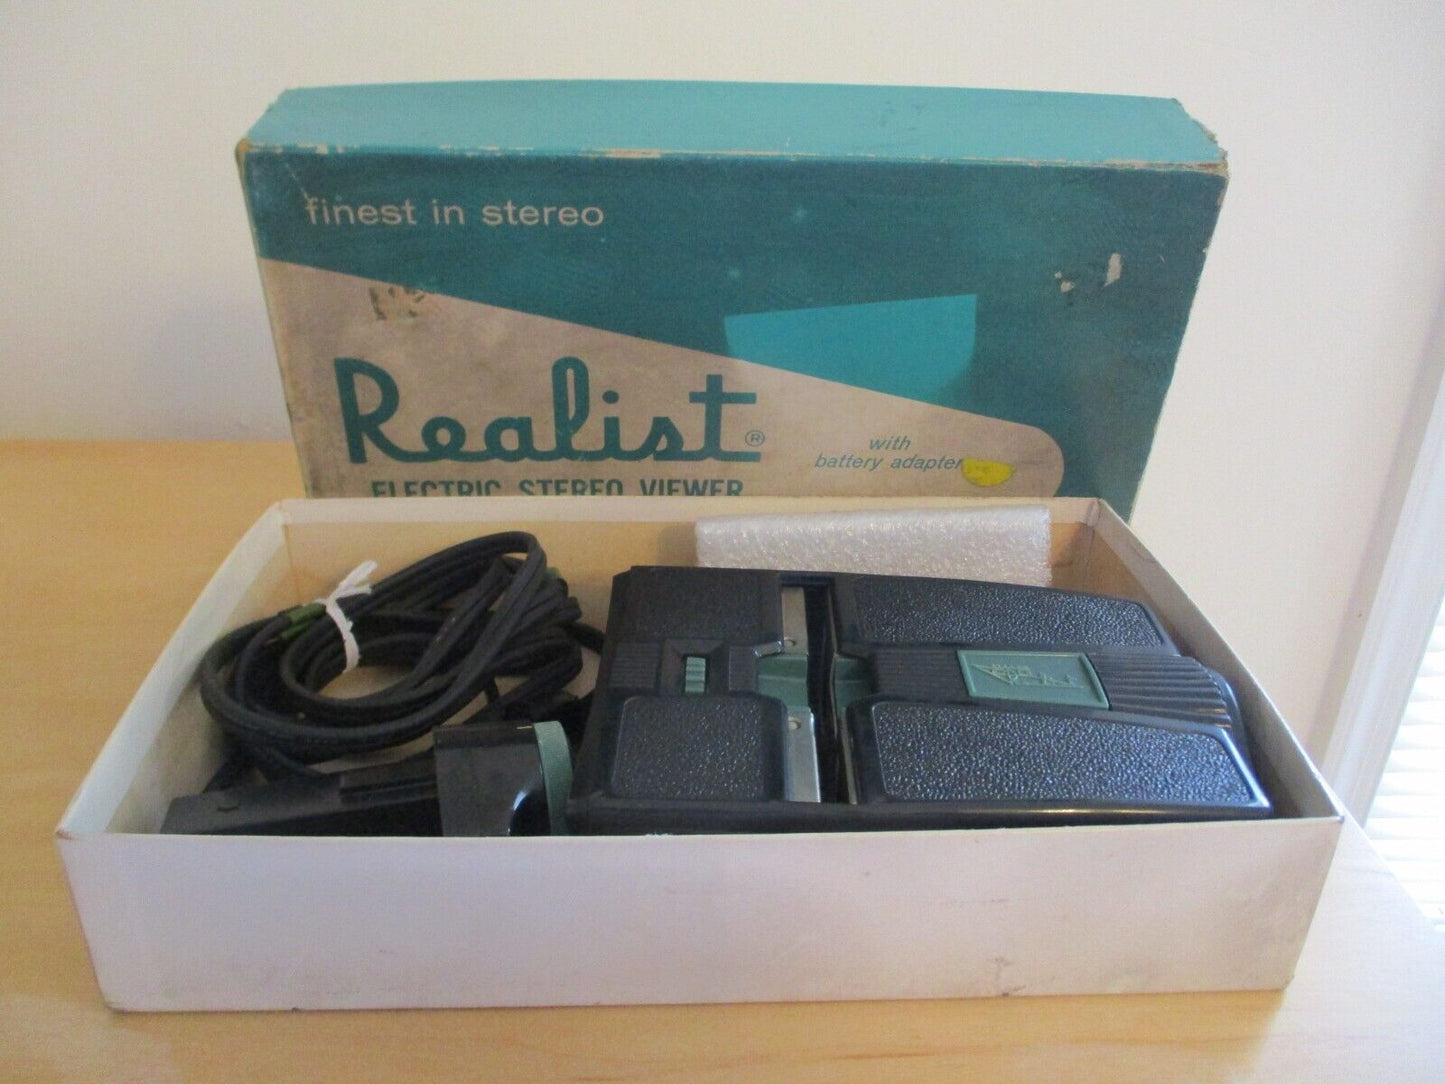 Vintage Realist Green Button Electric Stereo Viewer Model 2062  -  Original Box